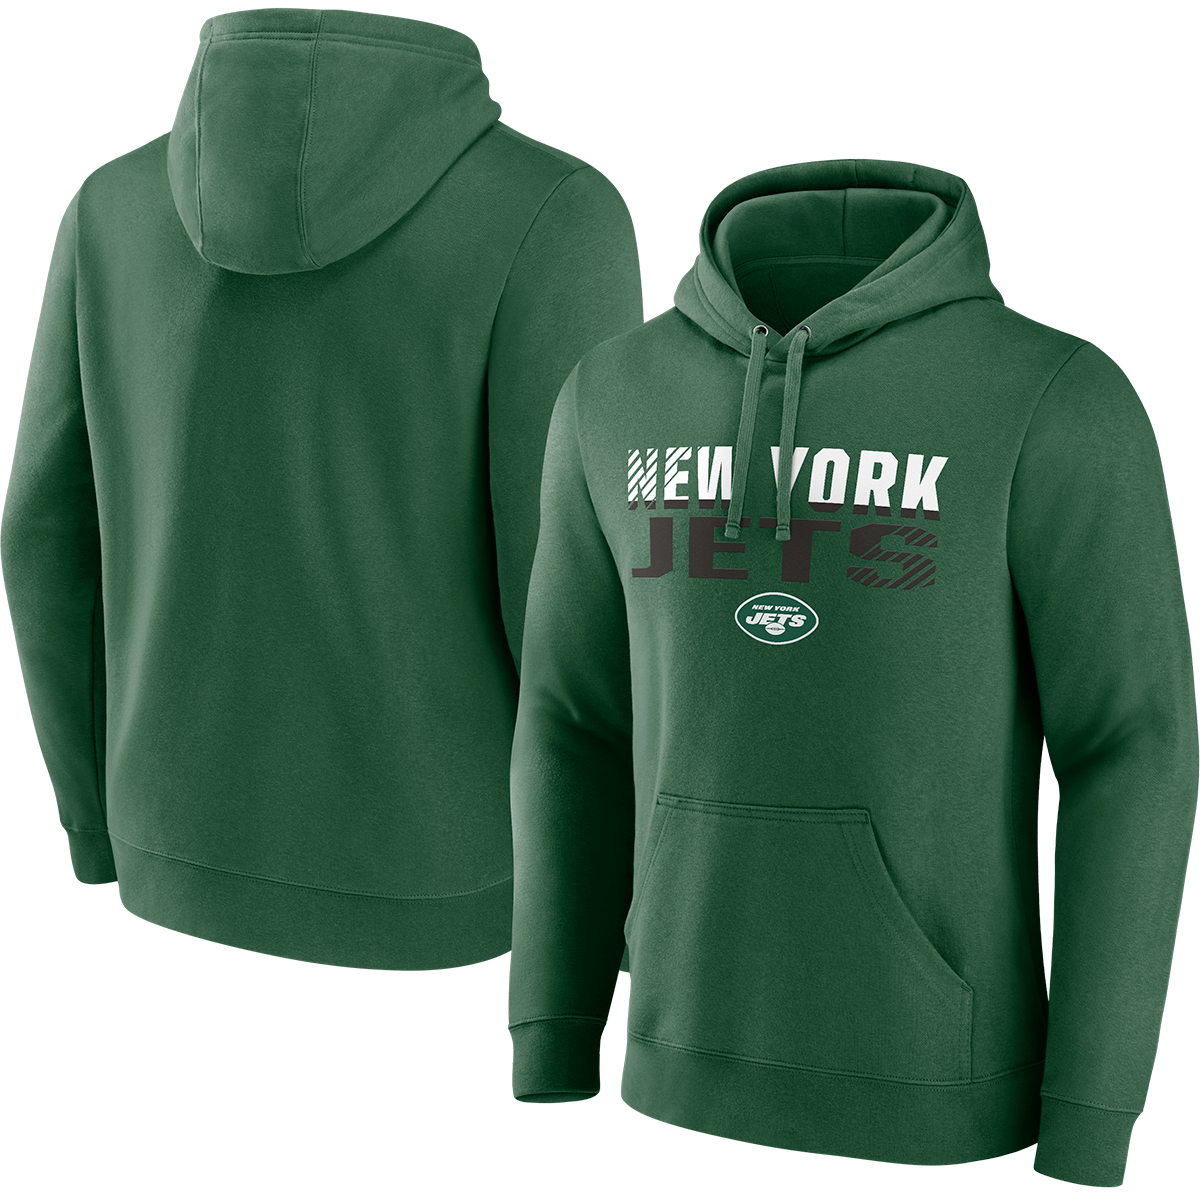 New York Jets Men's Fanatics Fade Out Fitted Pullover Hoodie